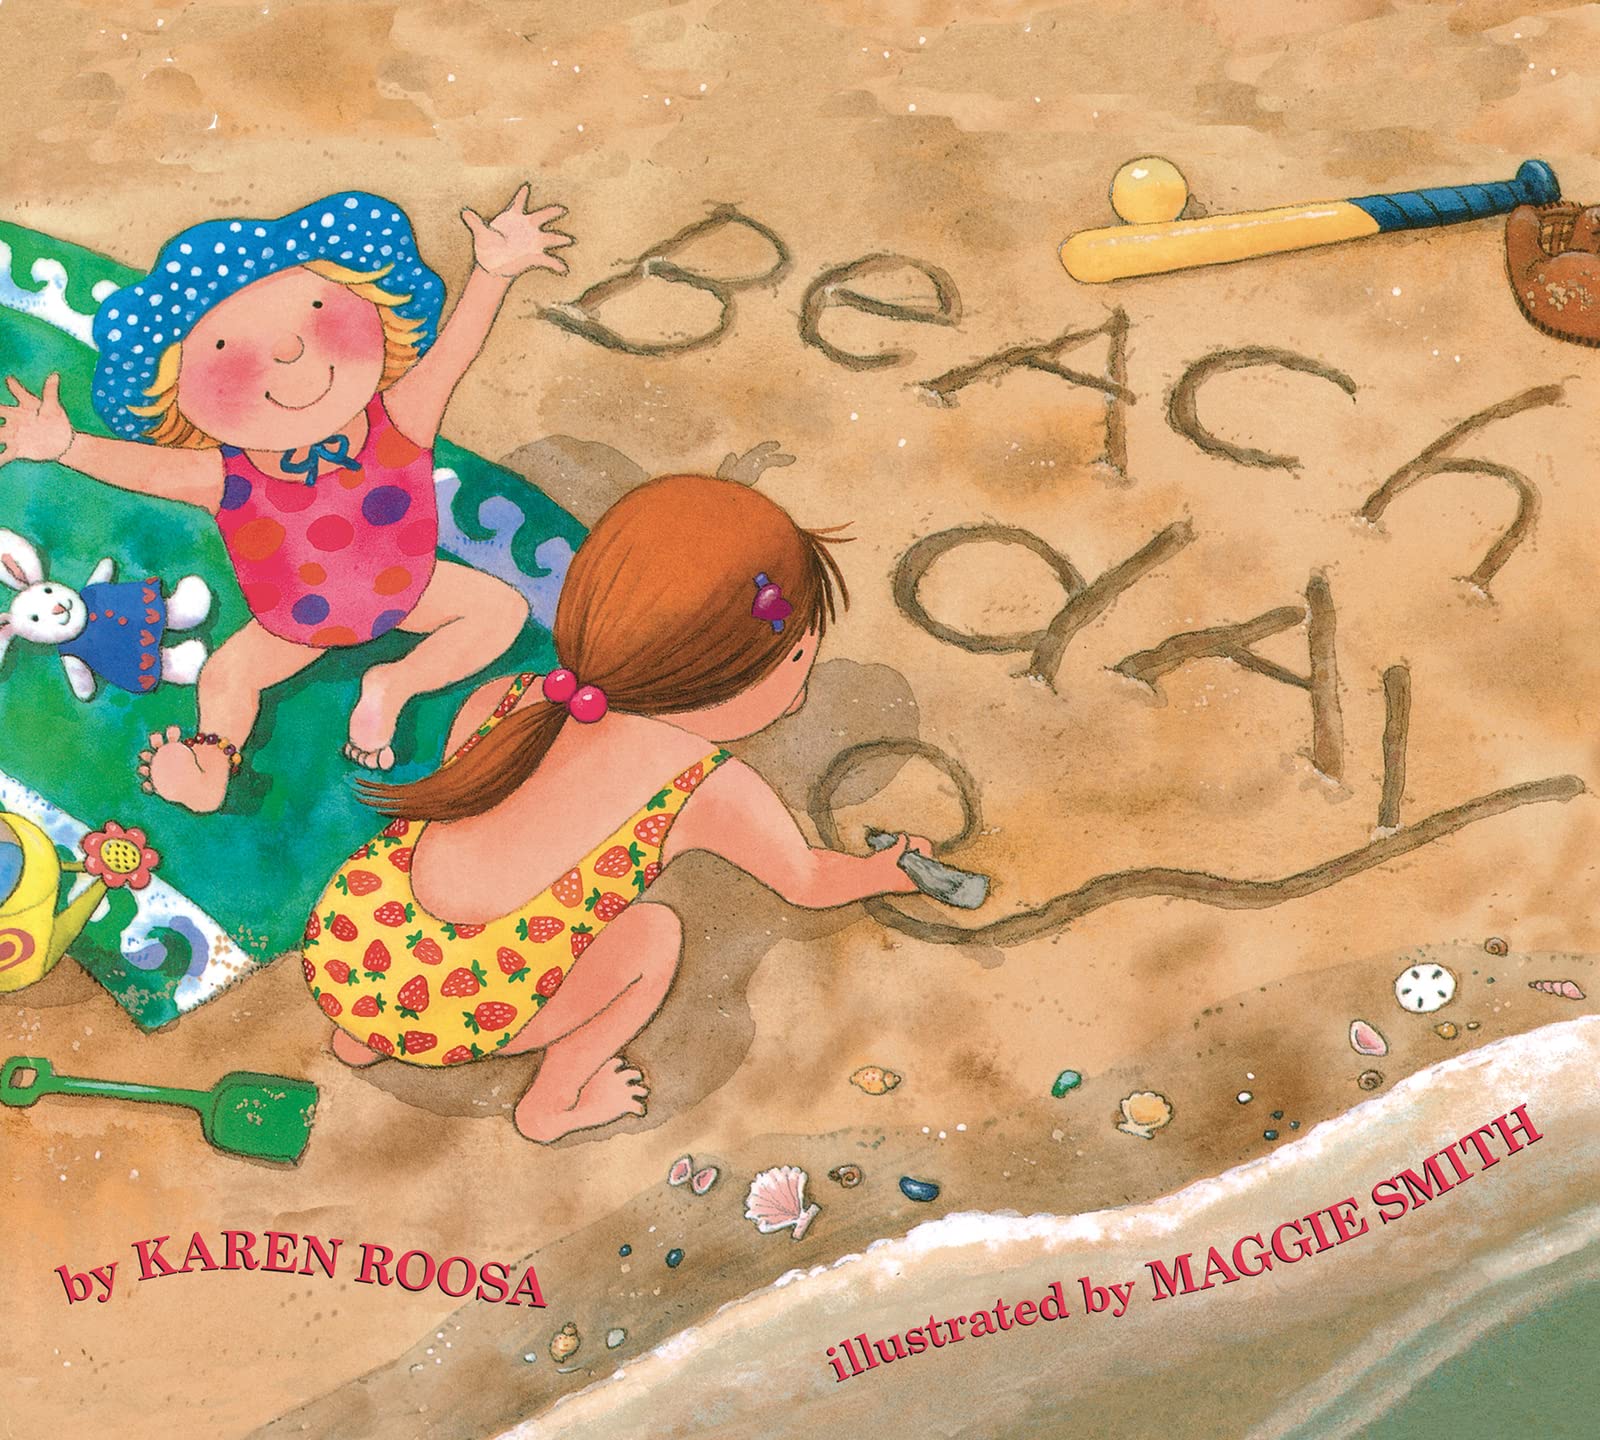 speech and language teaching concepts for Beach Day in speech therapy